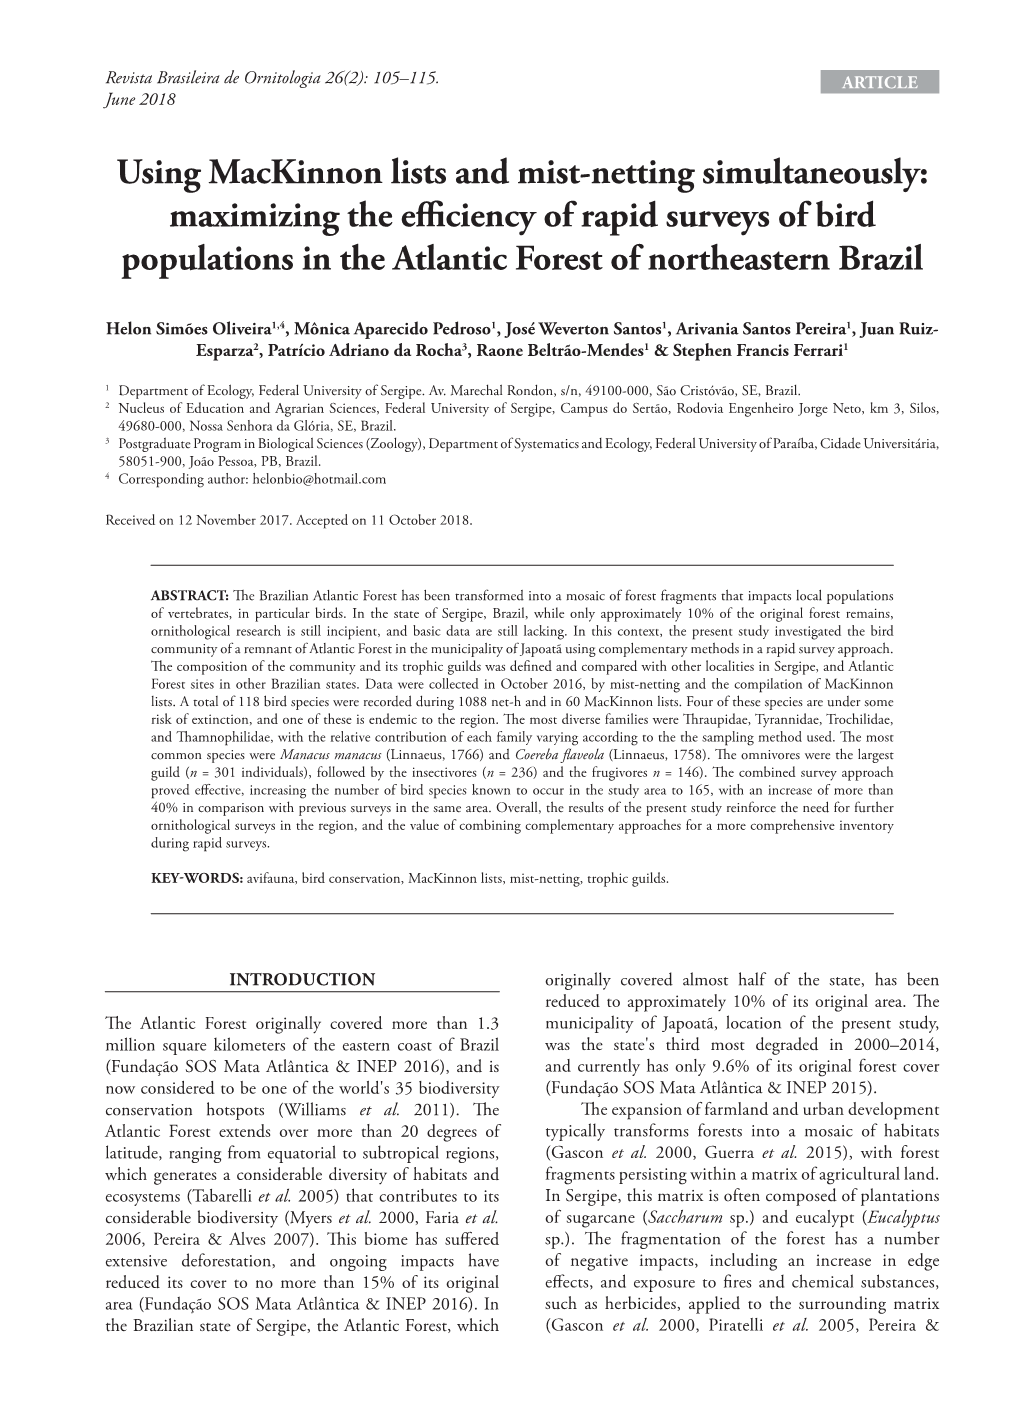 Using Mackinnon Lists and Mist-Netting Simultaneously: Maximizing the Efficiency of Rapid Surveys of Bird Populations in the Atlantic Forest of Northeastern Brazil